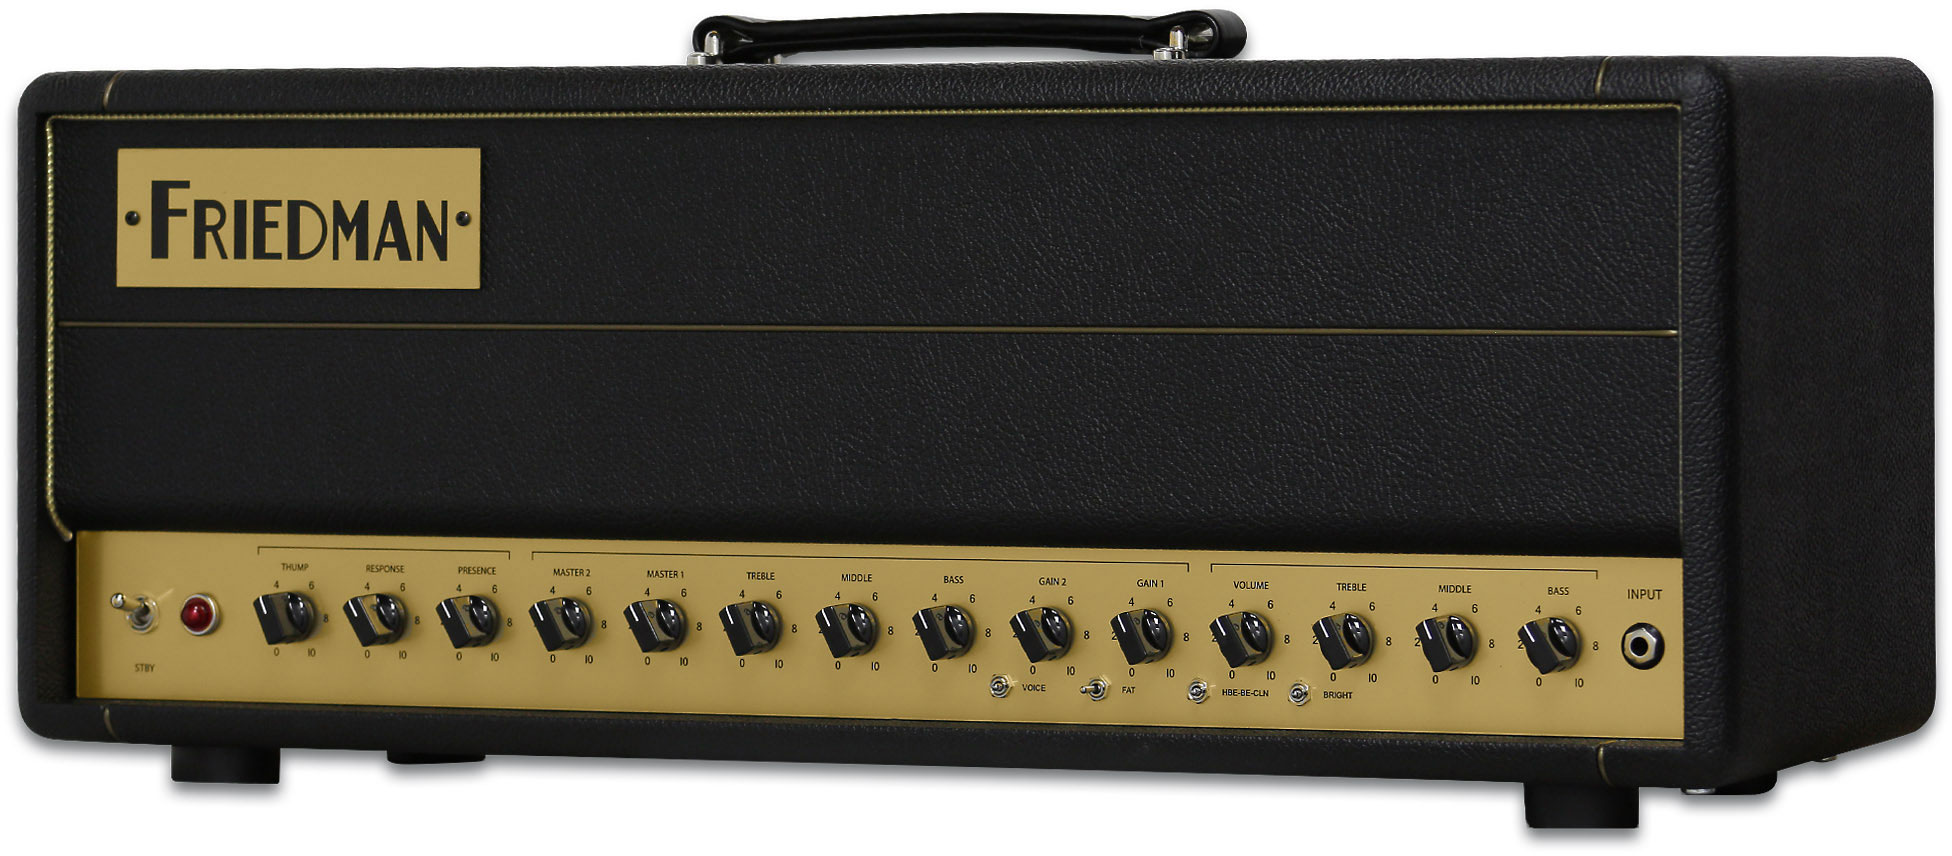 Friedman Amplification Be 50 Deluxe Head 25/50w - Electric guitar amp head - Variation 1